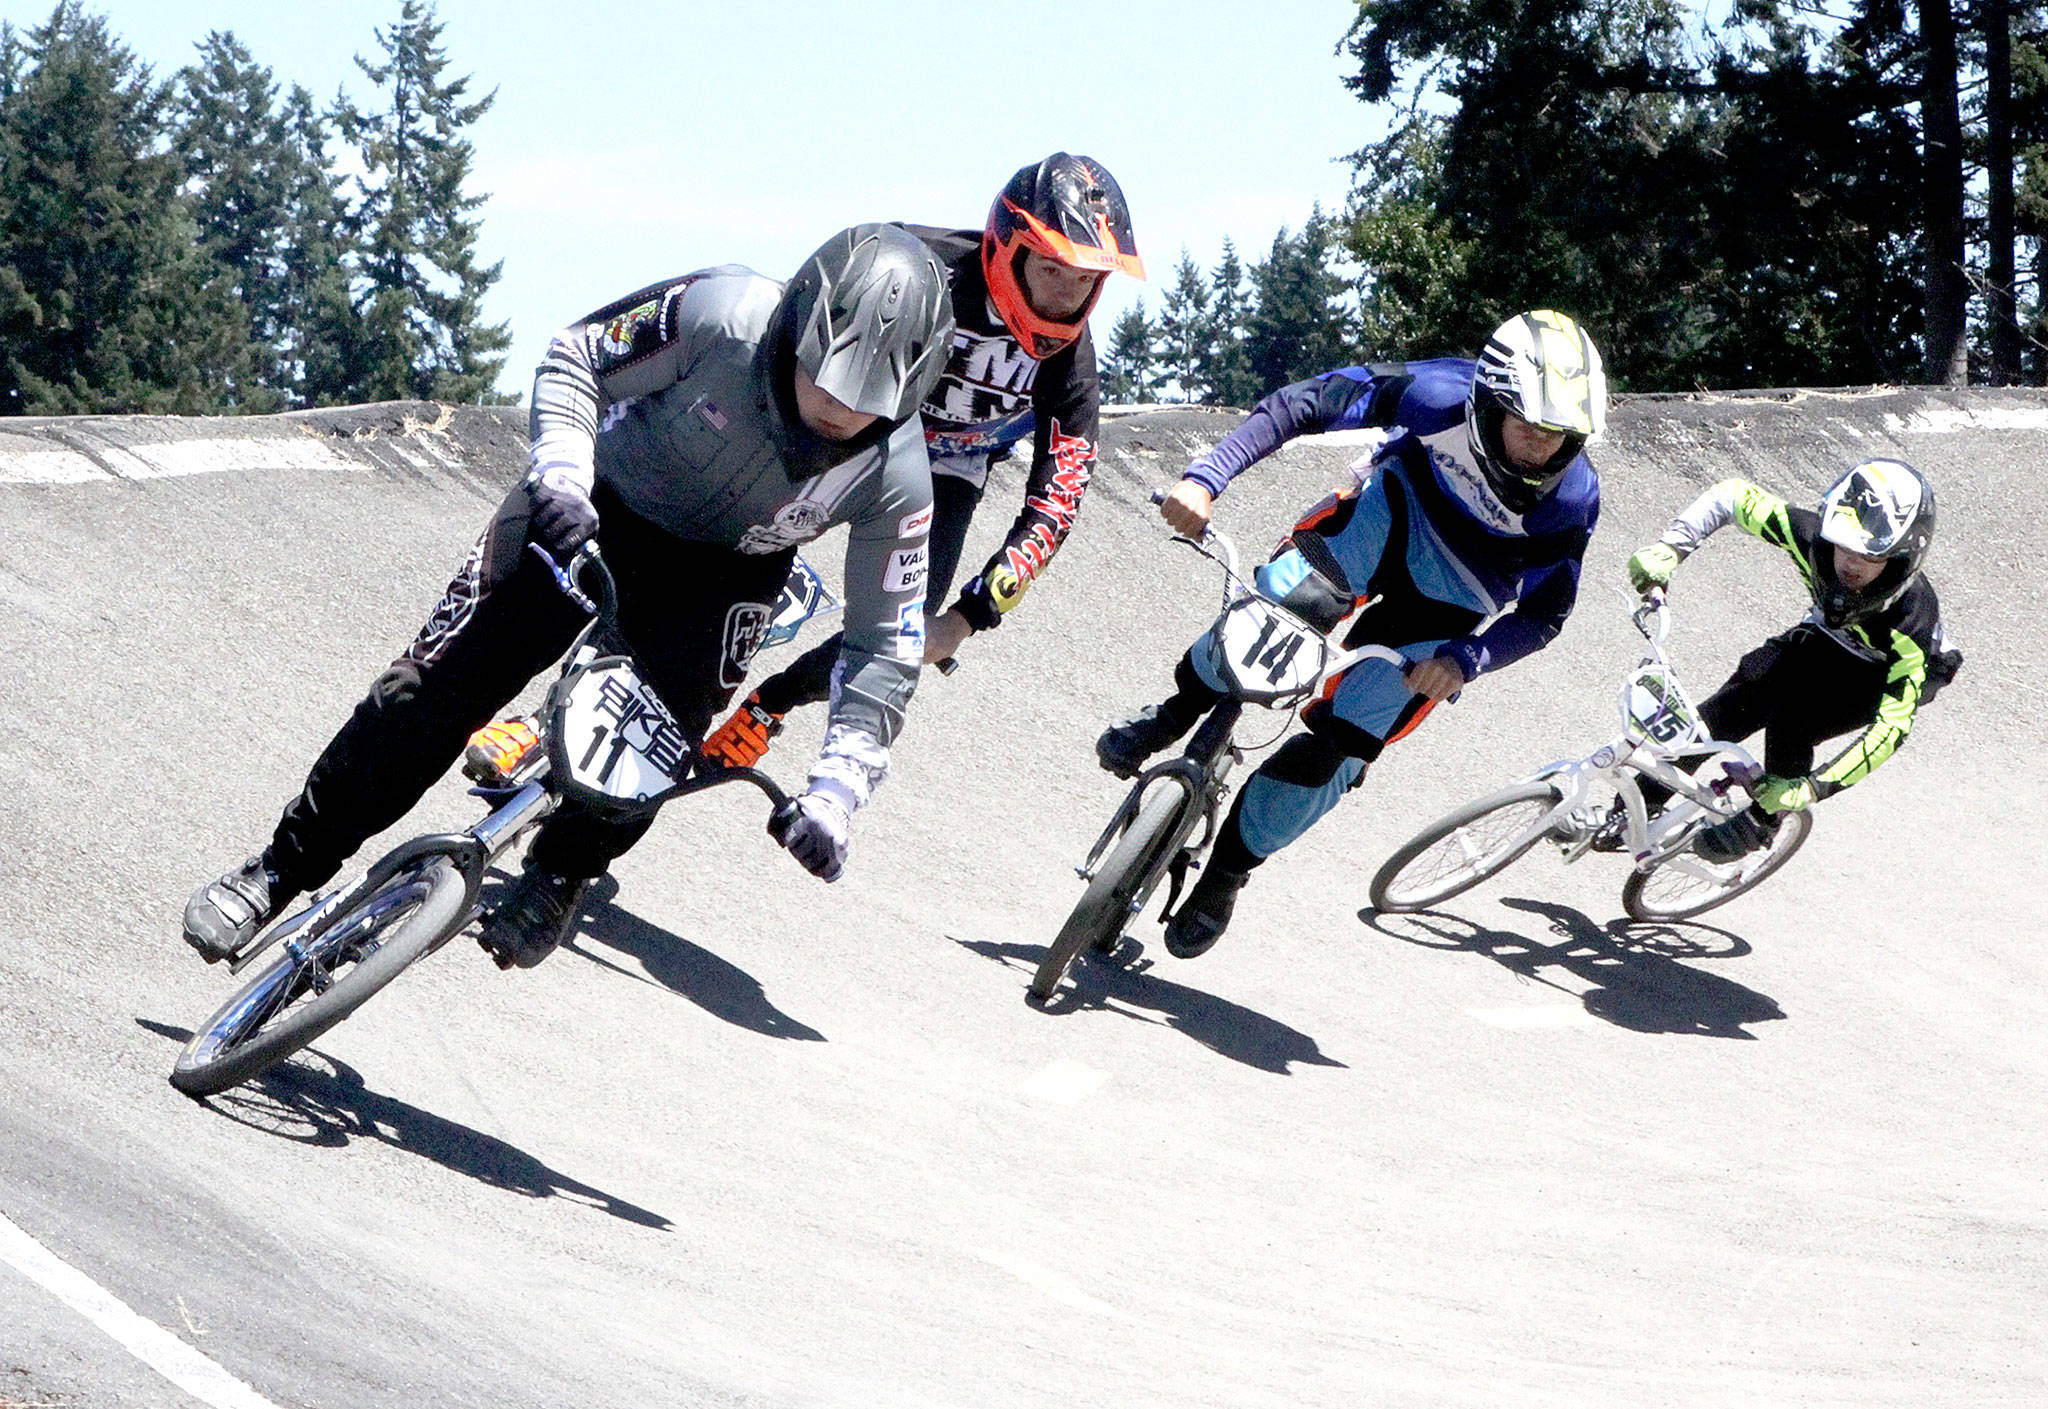 A qualifier for the Washington state BMX championships was held Sunday at the Lincoln Park BMX track. Over 200 riders from ages 3 to 70 entered the various “motos” to try to earn their way to the state championships in Richland over Labor Day weekend. In this face, from left are Bailey Conners (11) from Puyallup, #14 is Casey Cramer (14) from Des Moines and Preston Stevens (15) of Milton rounding the big curve on the track. (Dave Logan/for Peninsula Daily News)